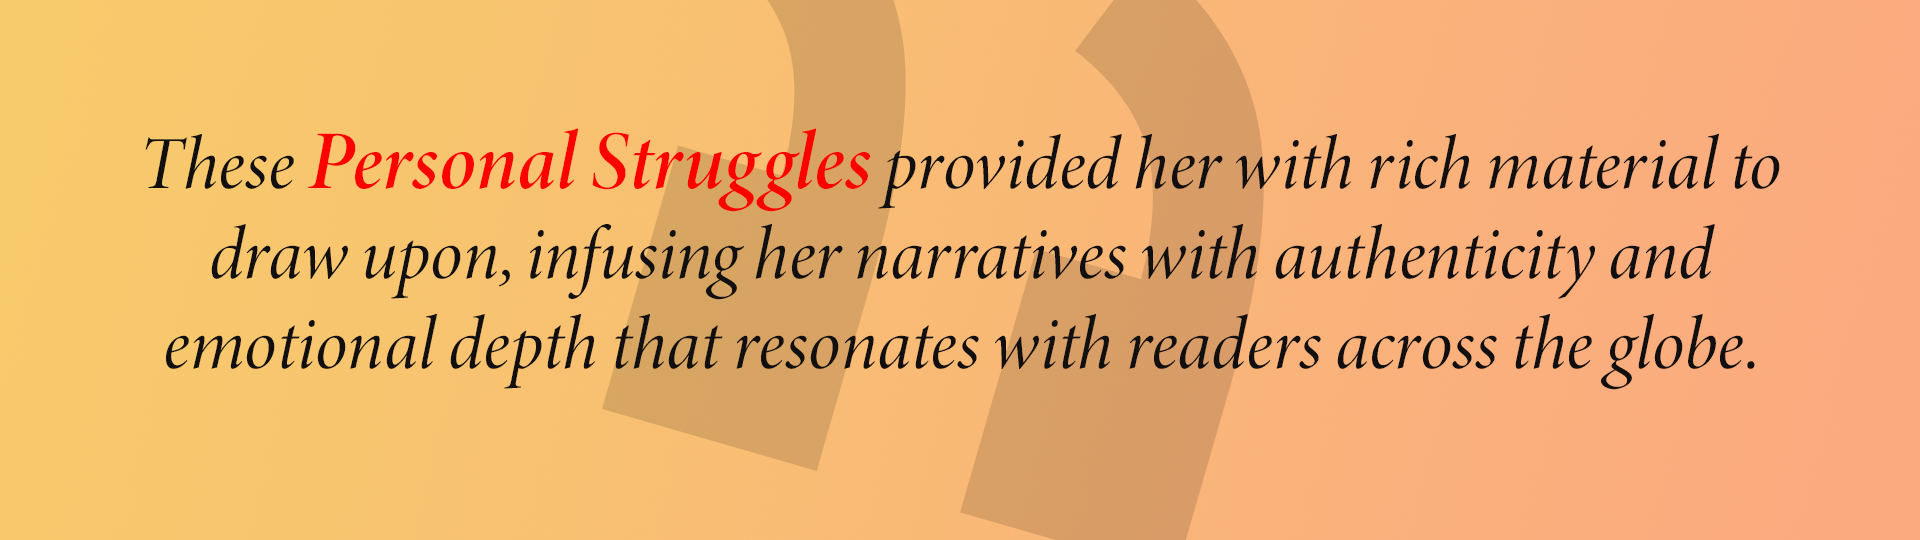 These Personal Struggles provided her with rich material to draw upon, infusing her narratives with authenticity and emotional depth that resonates with readers across the globe.